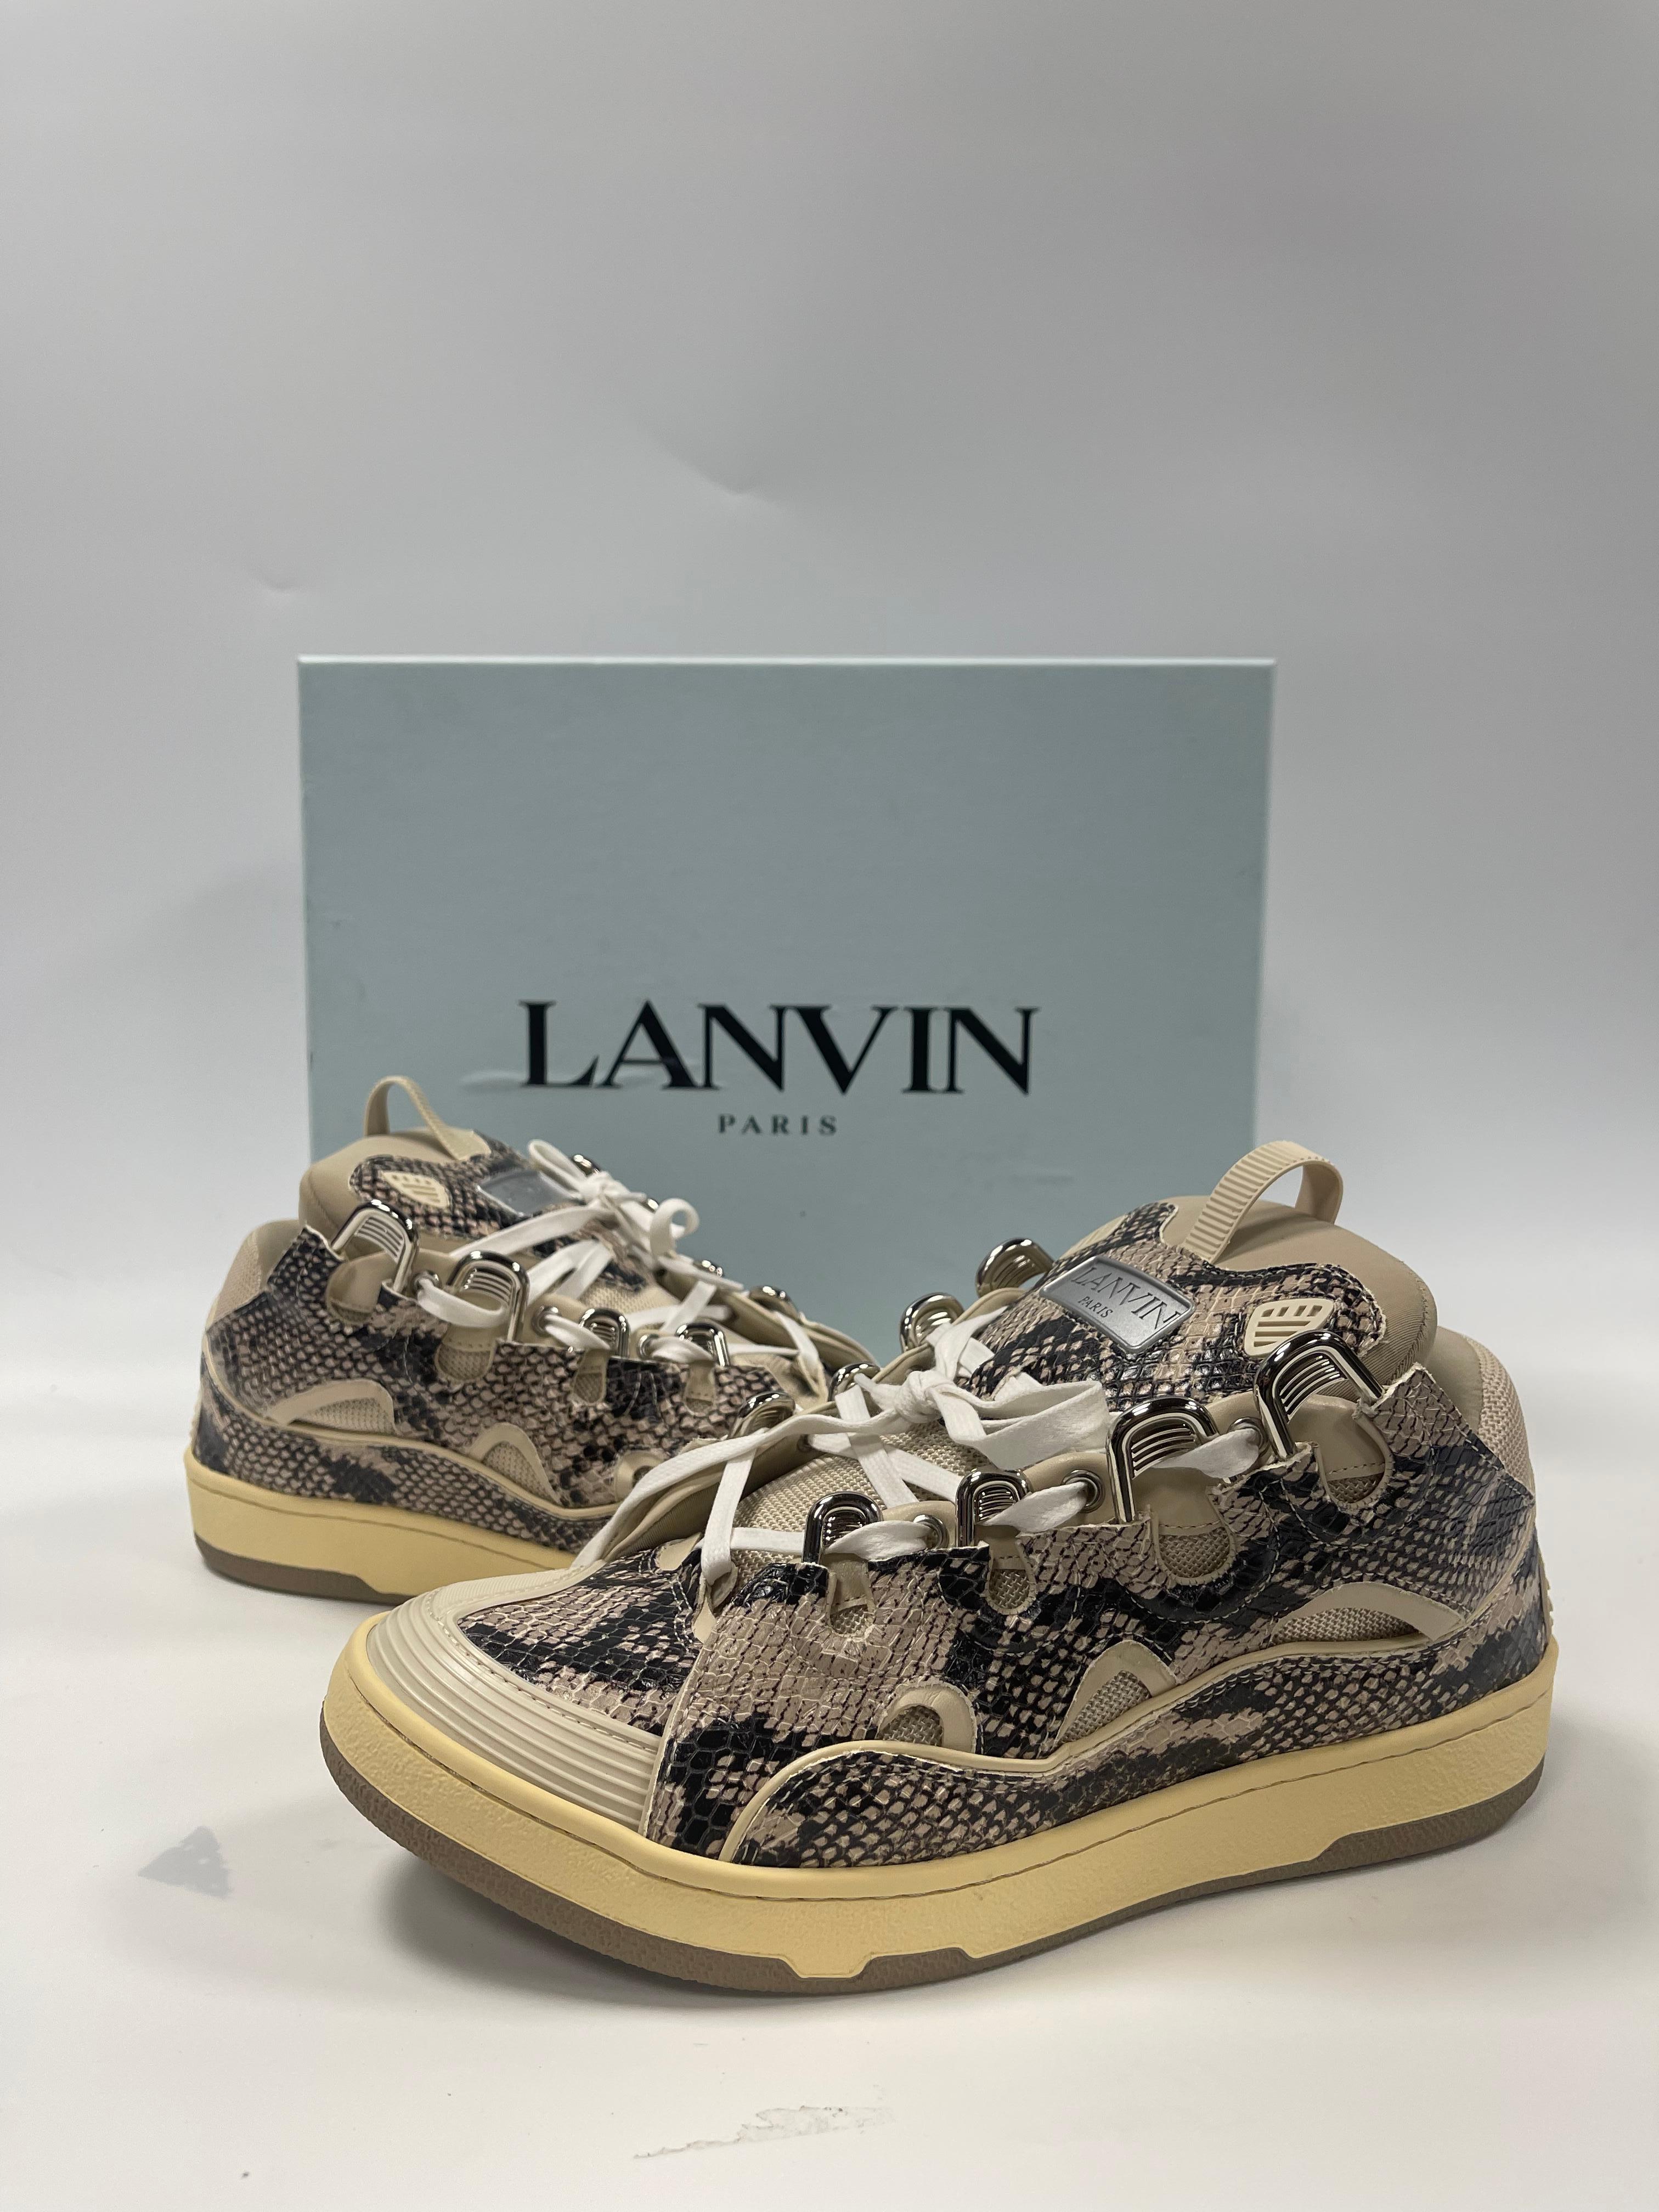 Lanvin draws inspiration for this shoe from the skateboarding styles of the '90s. Oversized and exuberant, the Curb sneaker stands out for its extraordinary comfort that comes from its rounded shape and massive padding. Style: